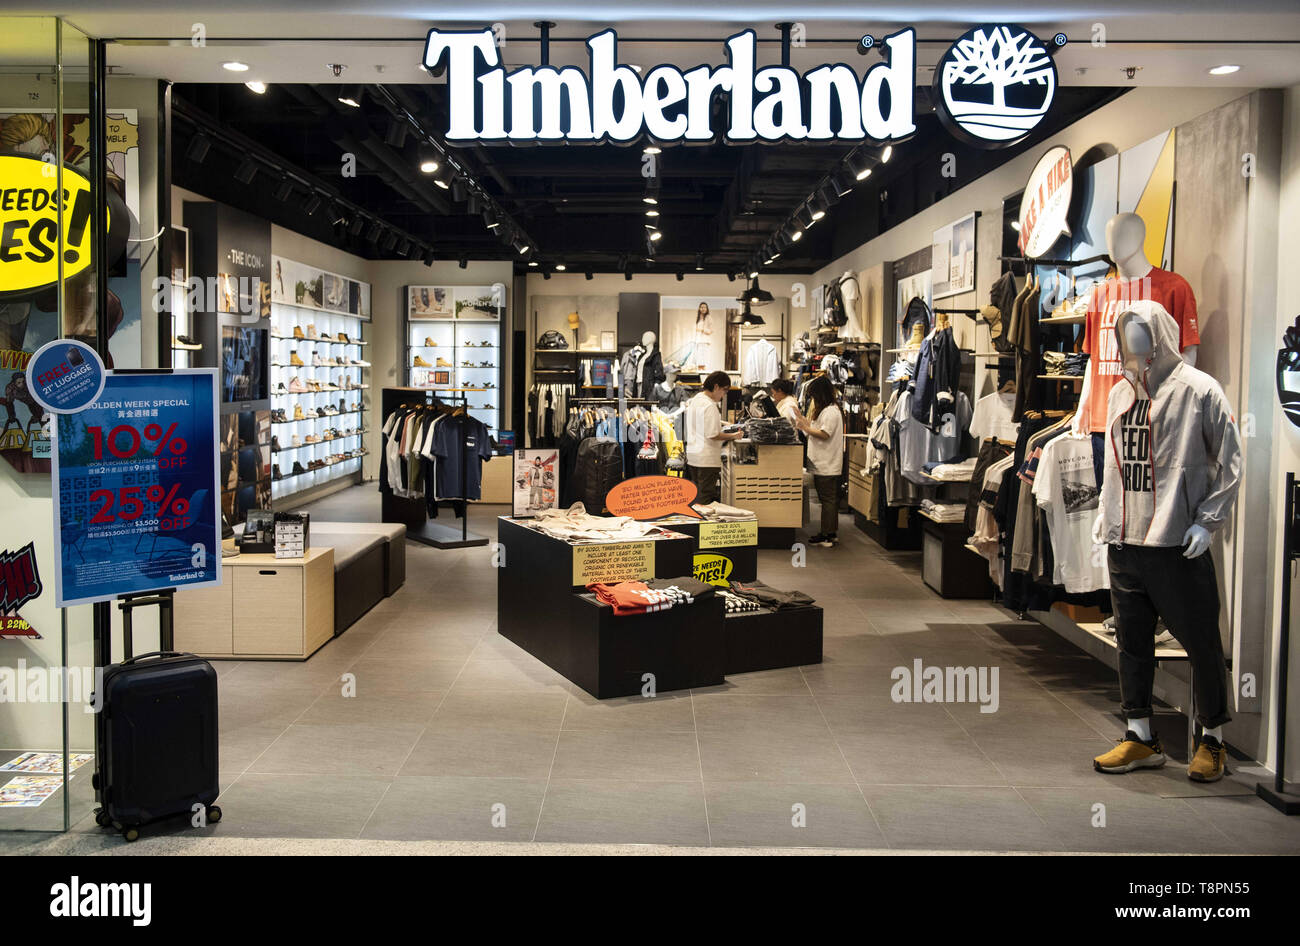 Page 3 - Timberland Store High Resolution Stock Photography and Images -  Alamy